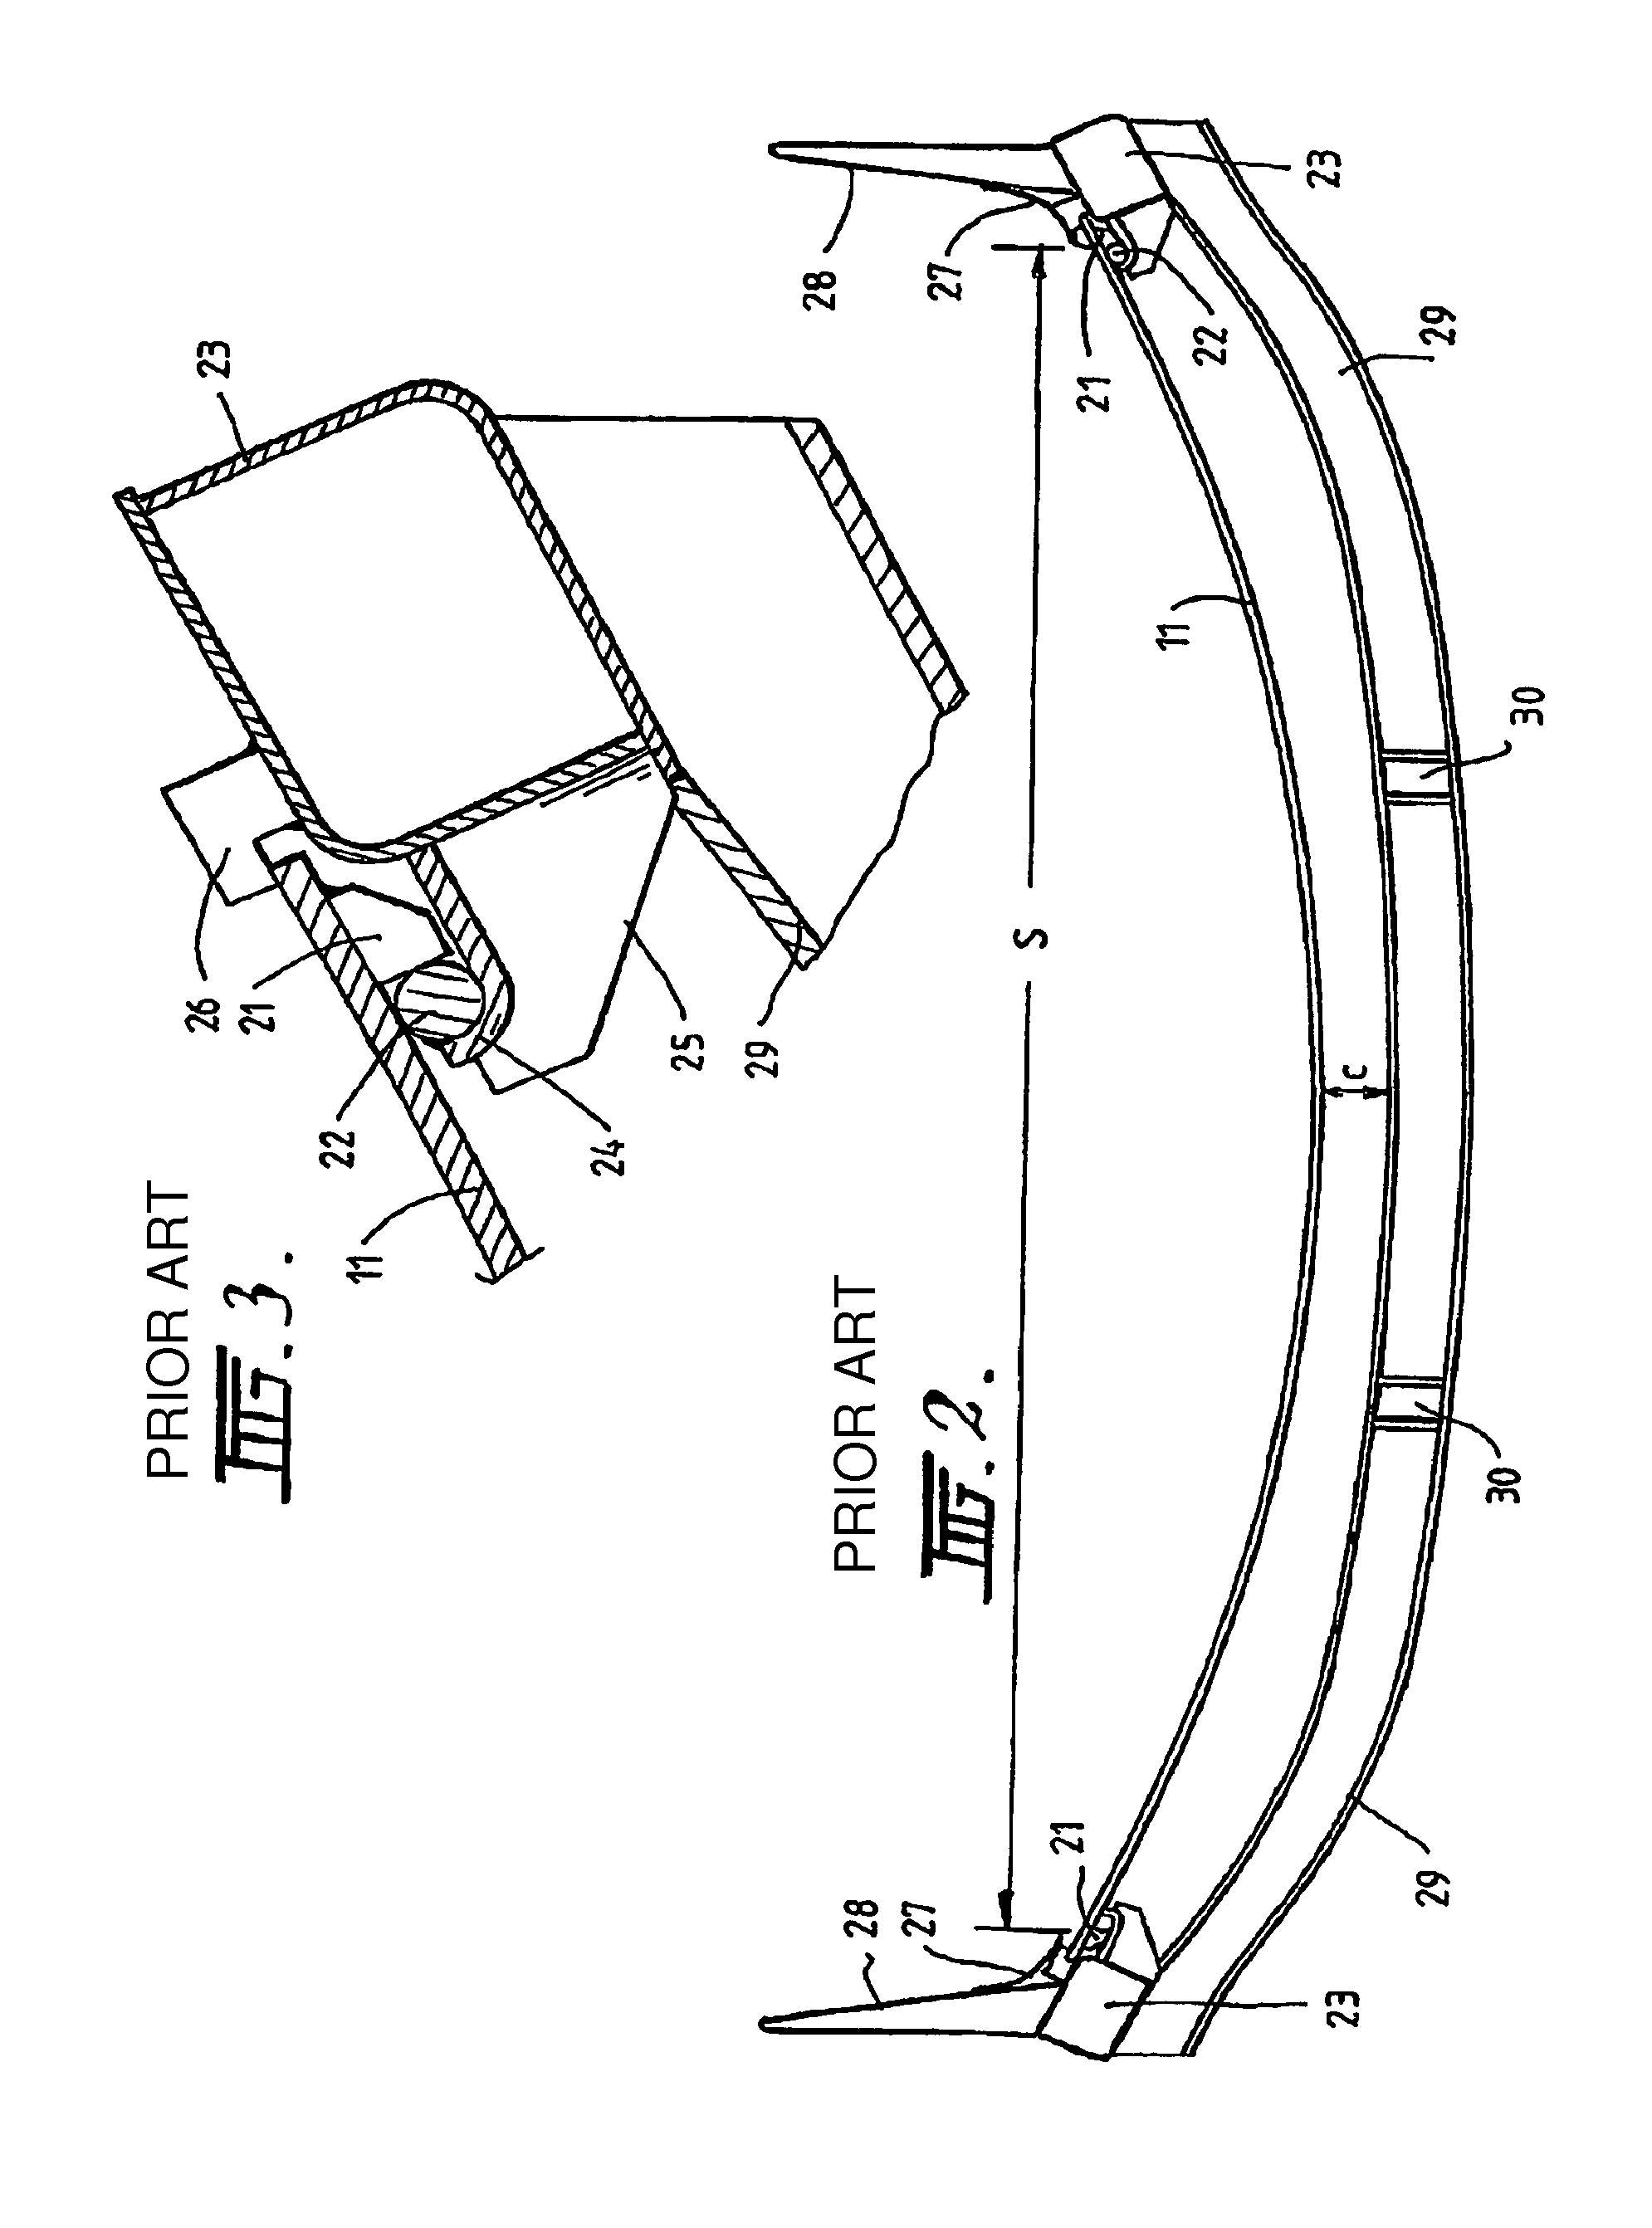 Vehicle body with a curved metal plate floor